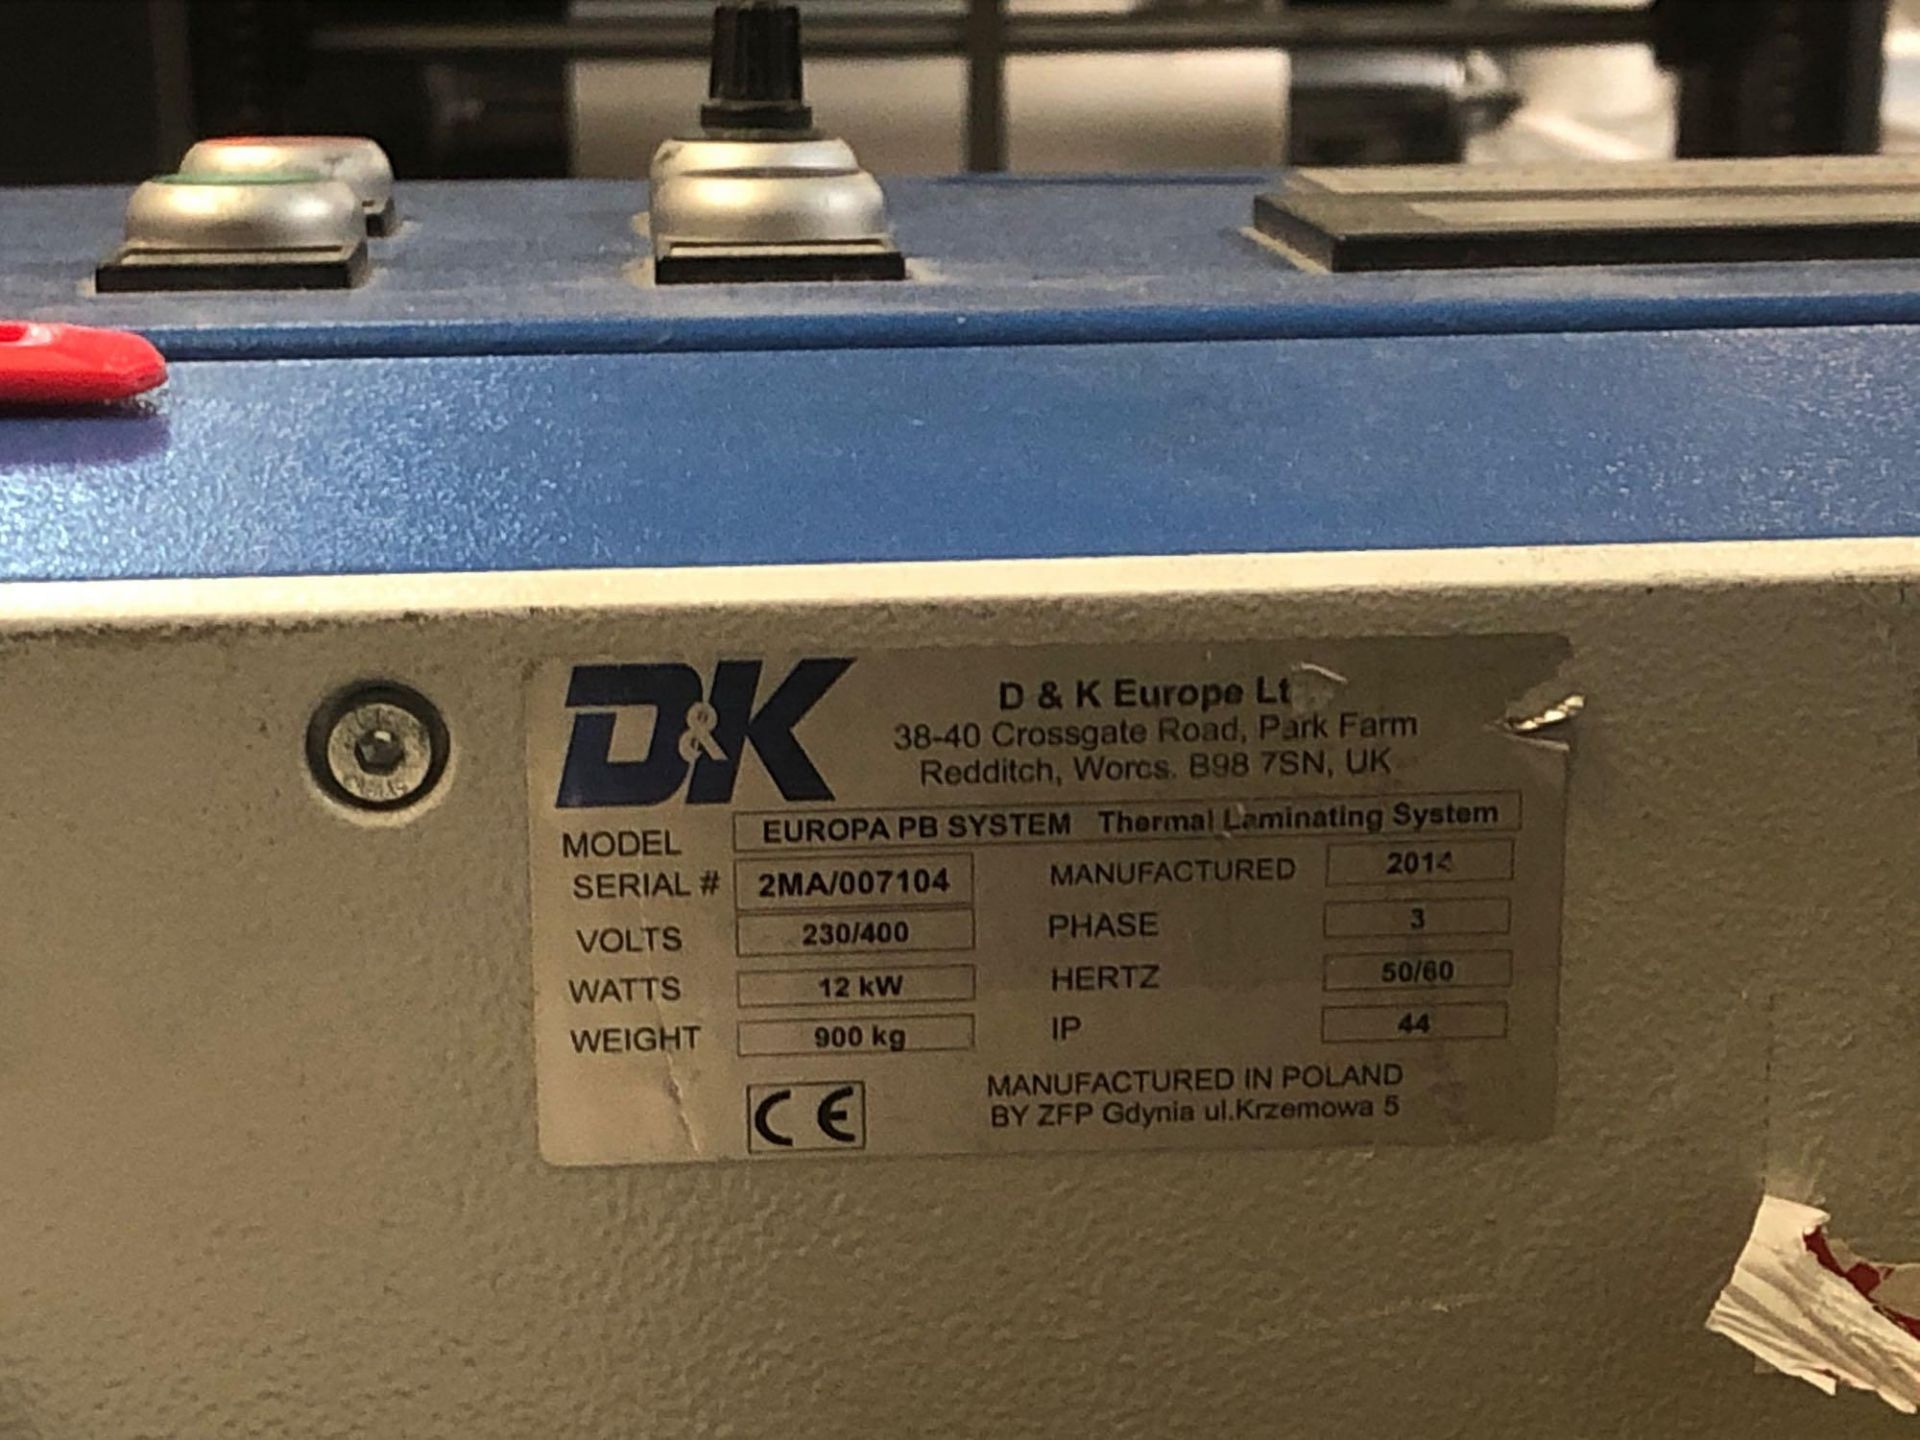 Europa PB Systems D&K Europe Ltd Thermal double sided  Laminating System s/n 2MA/007104 (2014) - Image 8 of 8